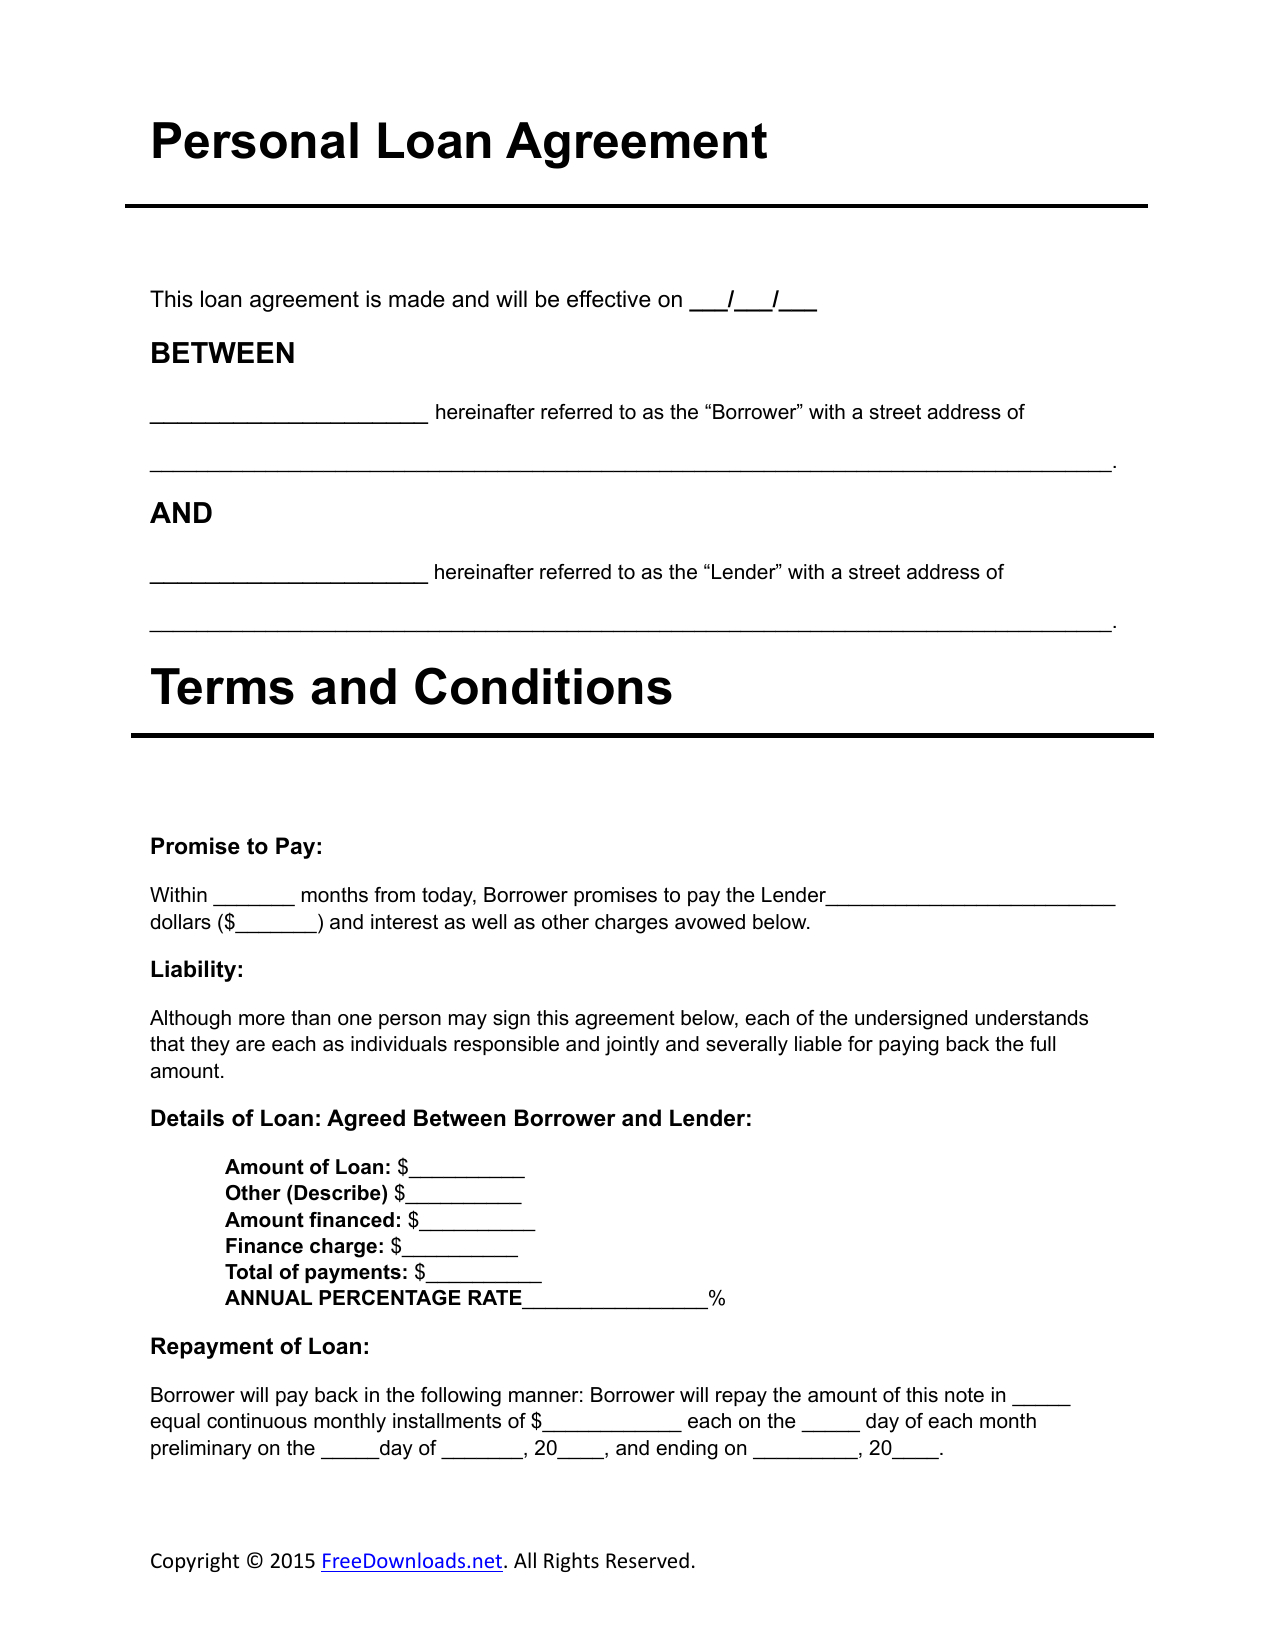 Personal Loan Agreement Template Download Personal Loan Agreement Template Pdf Rtf Word